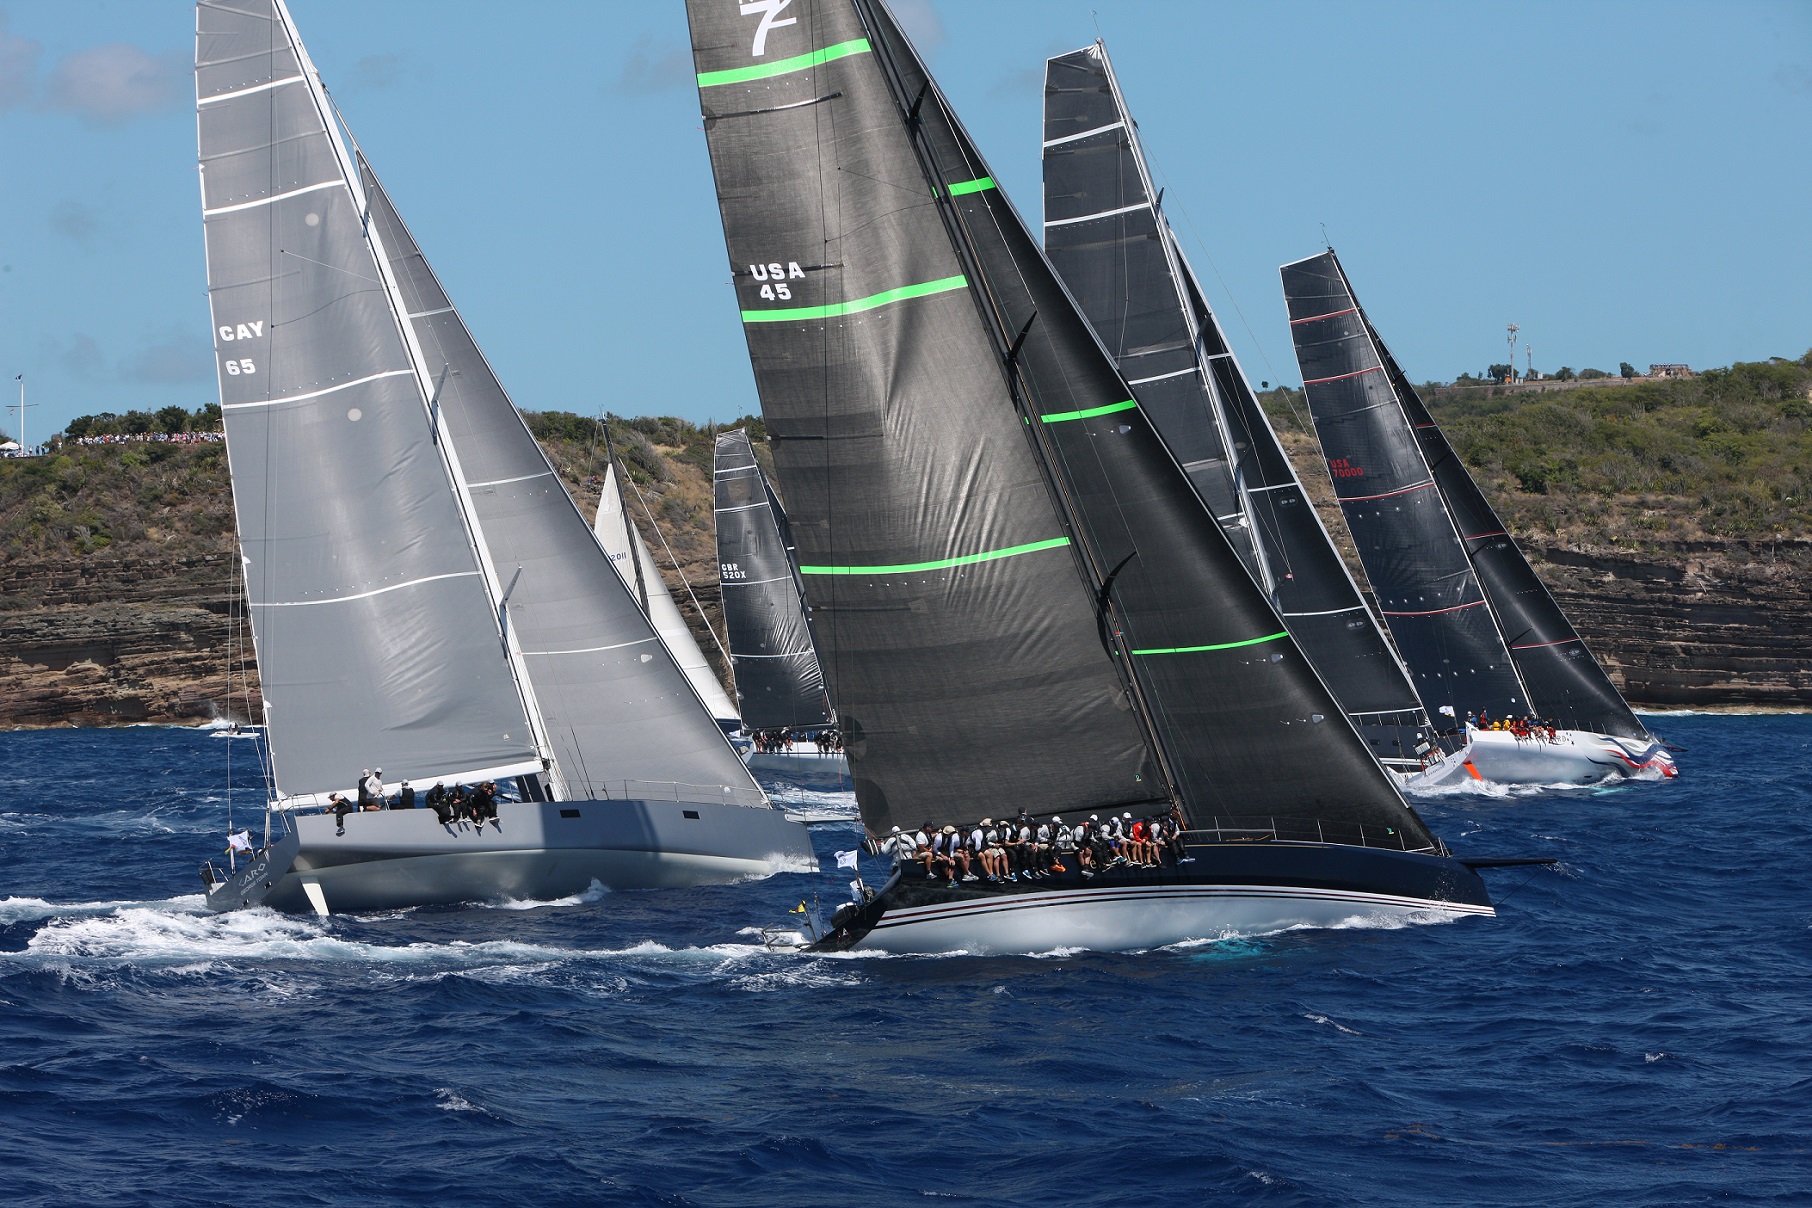 A spectacular start to the 2019 RORC Caribbean 600 in Antigua today. Bella Mente, Wizard and Caro in IRC Zero © Tim Wright/Photoaction.com